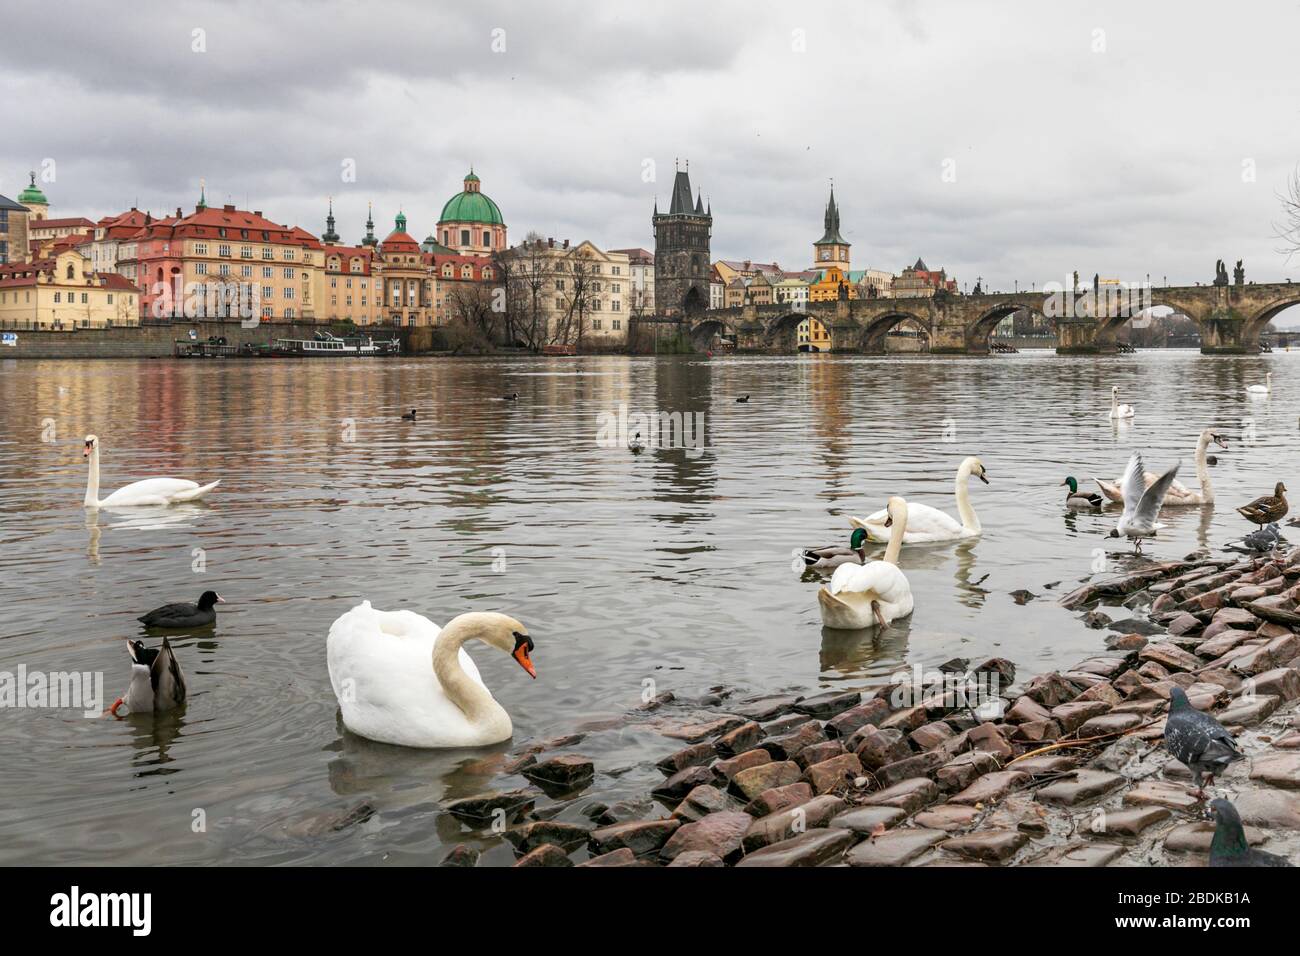 Wildfowl  including swans and ducks on the banks of the Vltava river near Charles Bridge in Prague, Czech Republic Stock Photo